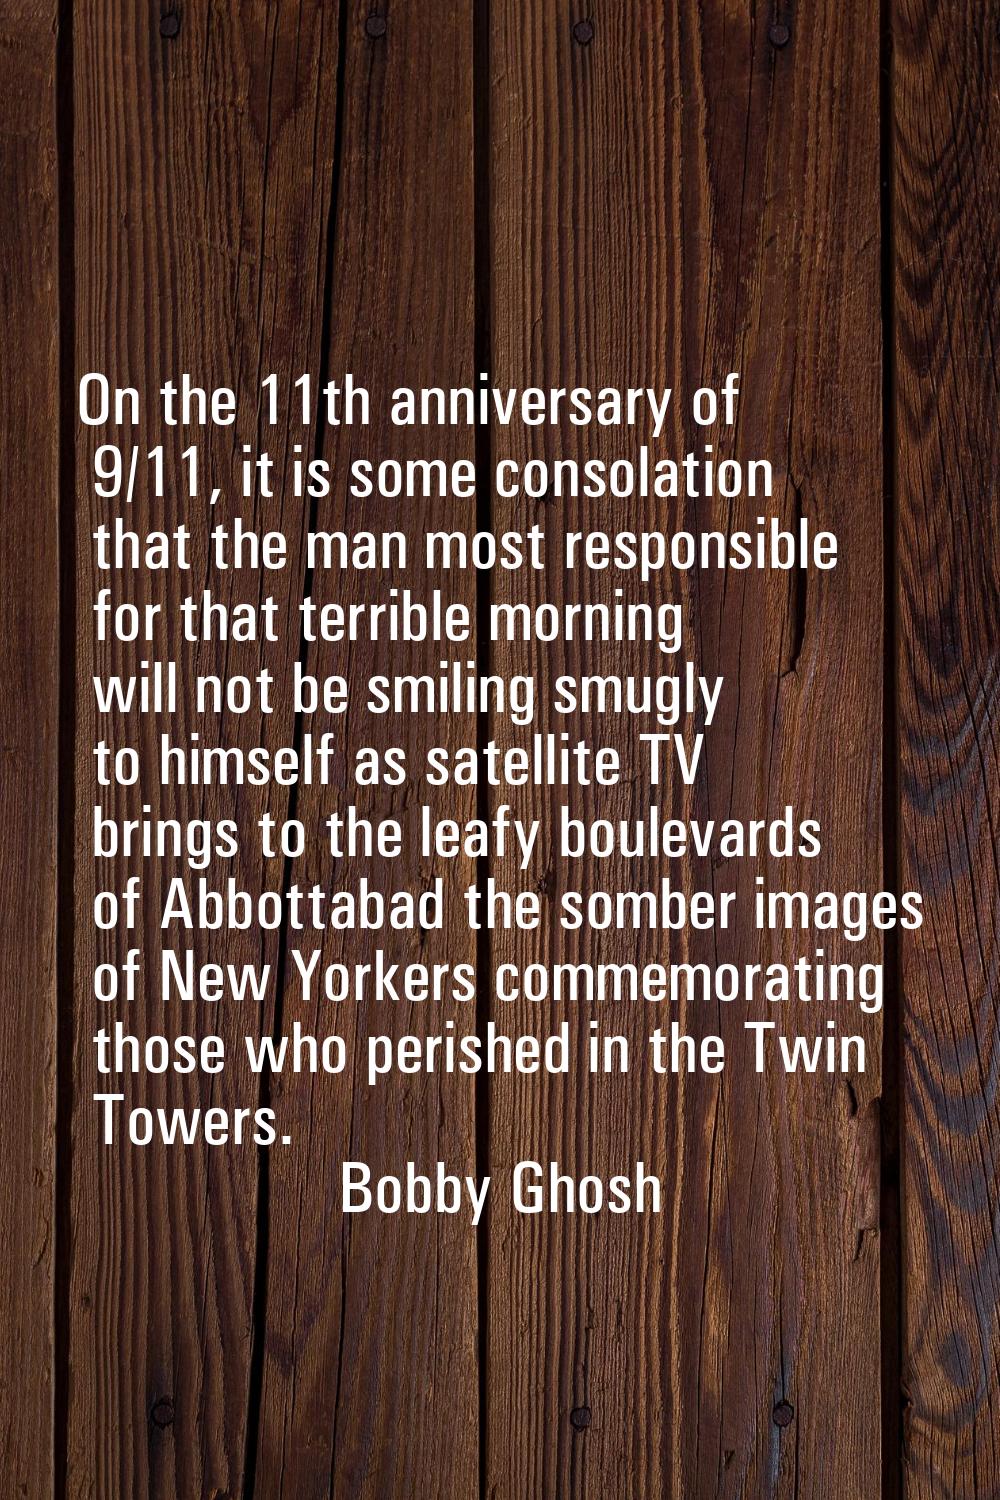 On the 11th anniversary of 9/11, it is some consolation that the man most responsible for that terr